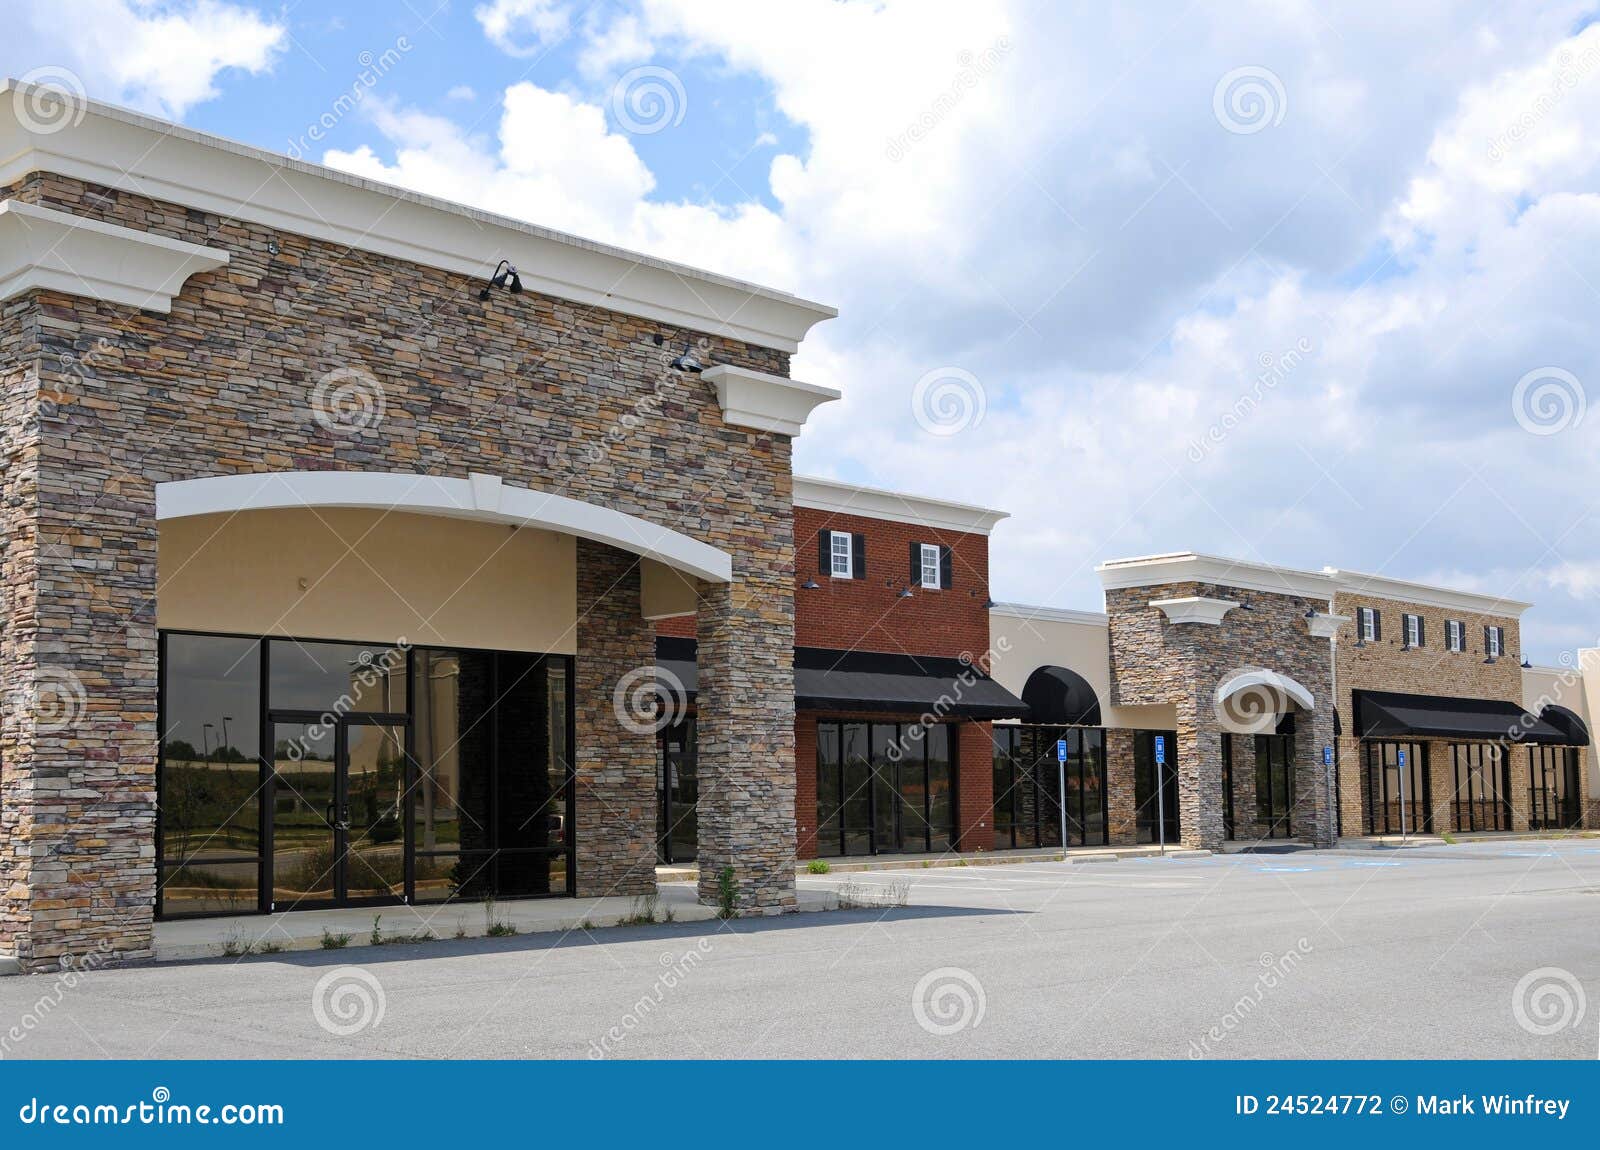 Vacant Commercial Property Stock Photography  Image 24524772